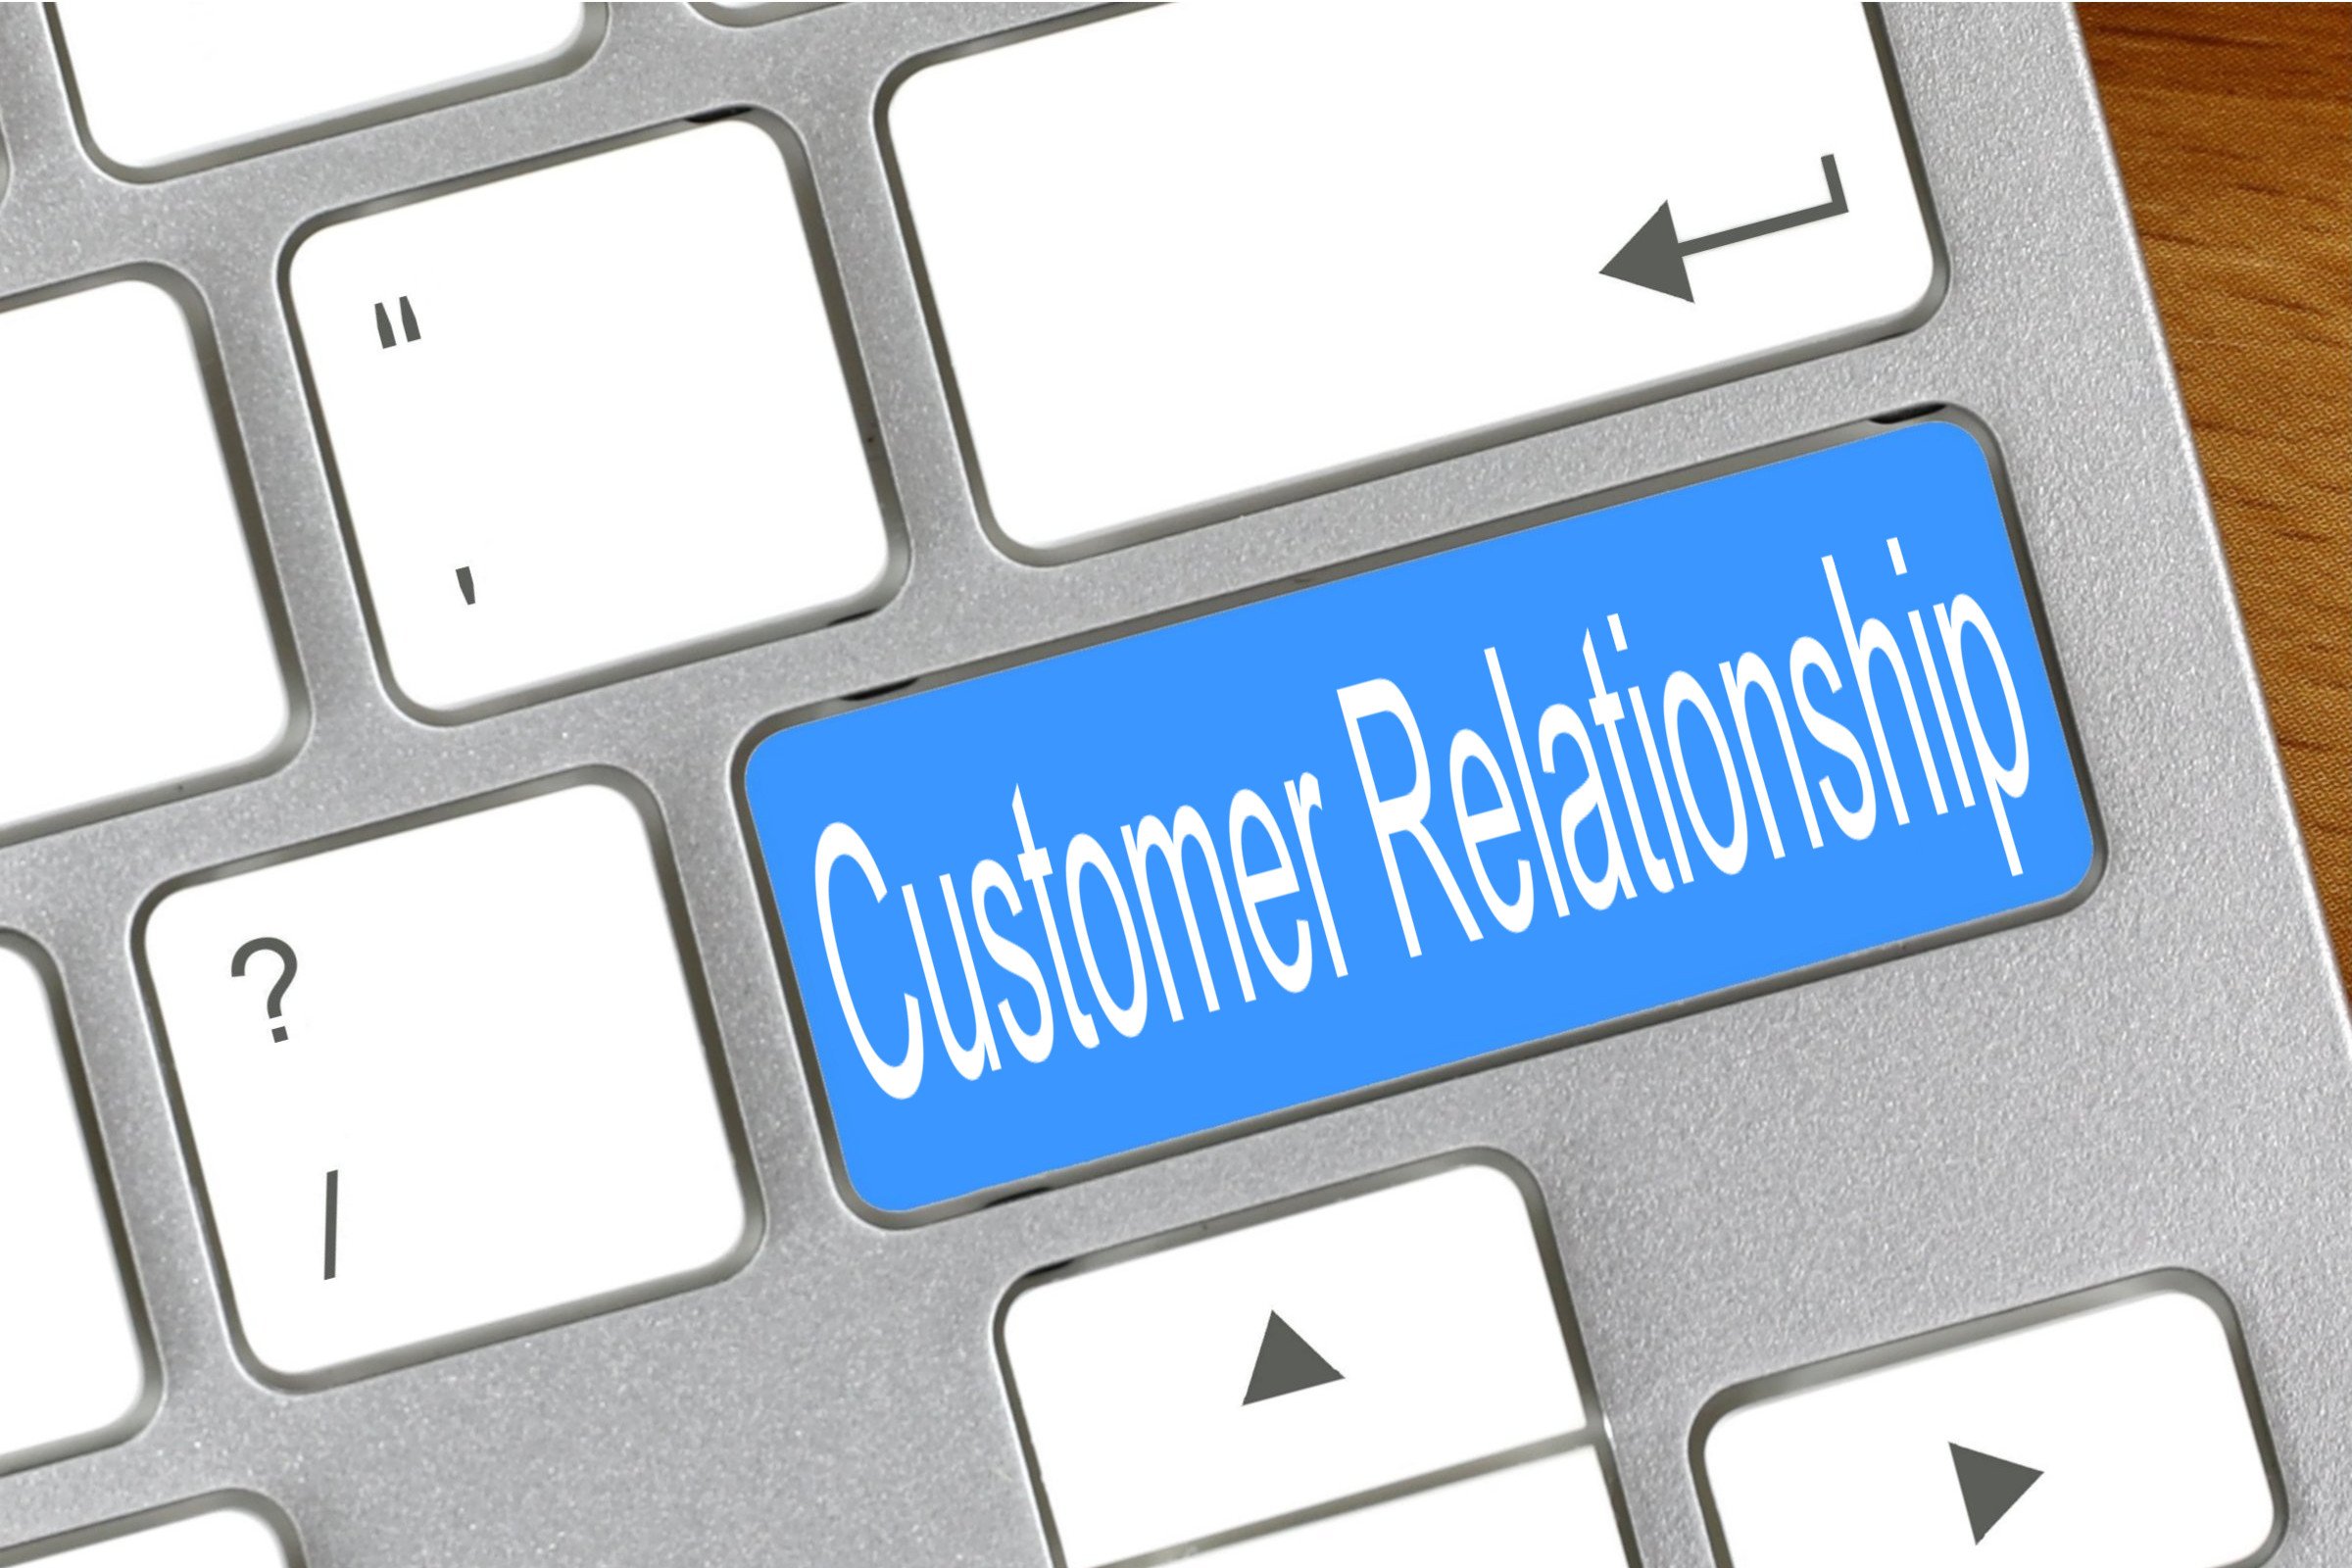 3. Optimizing Customer Relationships and Offering Incentives